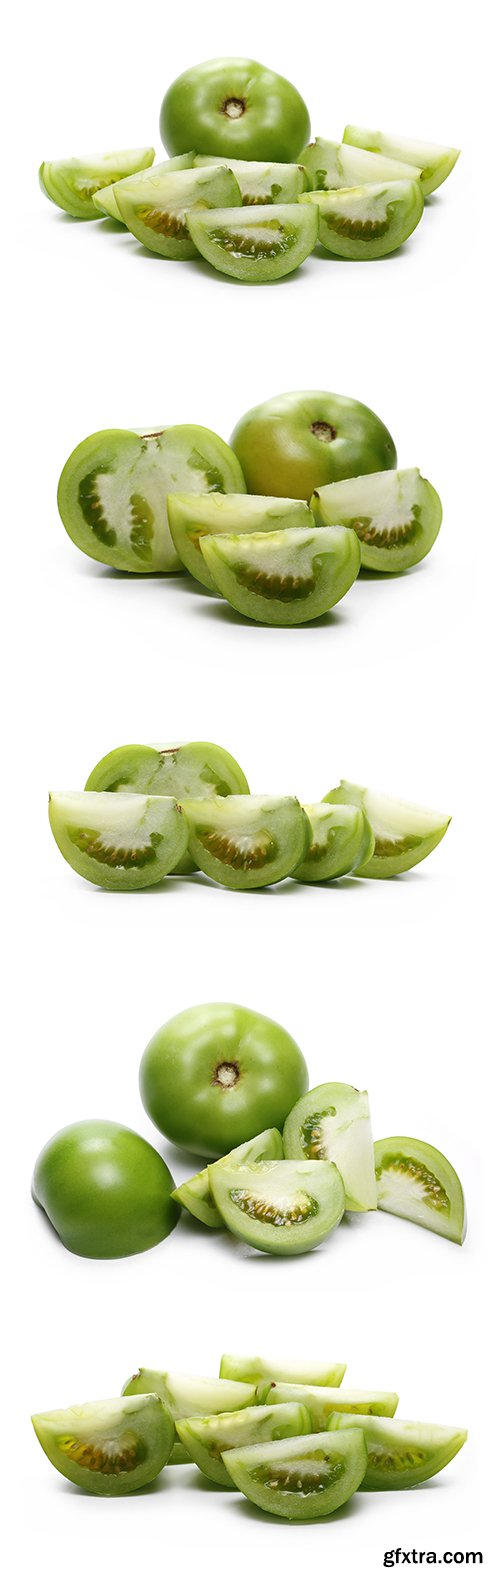 Green Tomato Slices Isolated - 10xJPGs